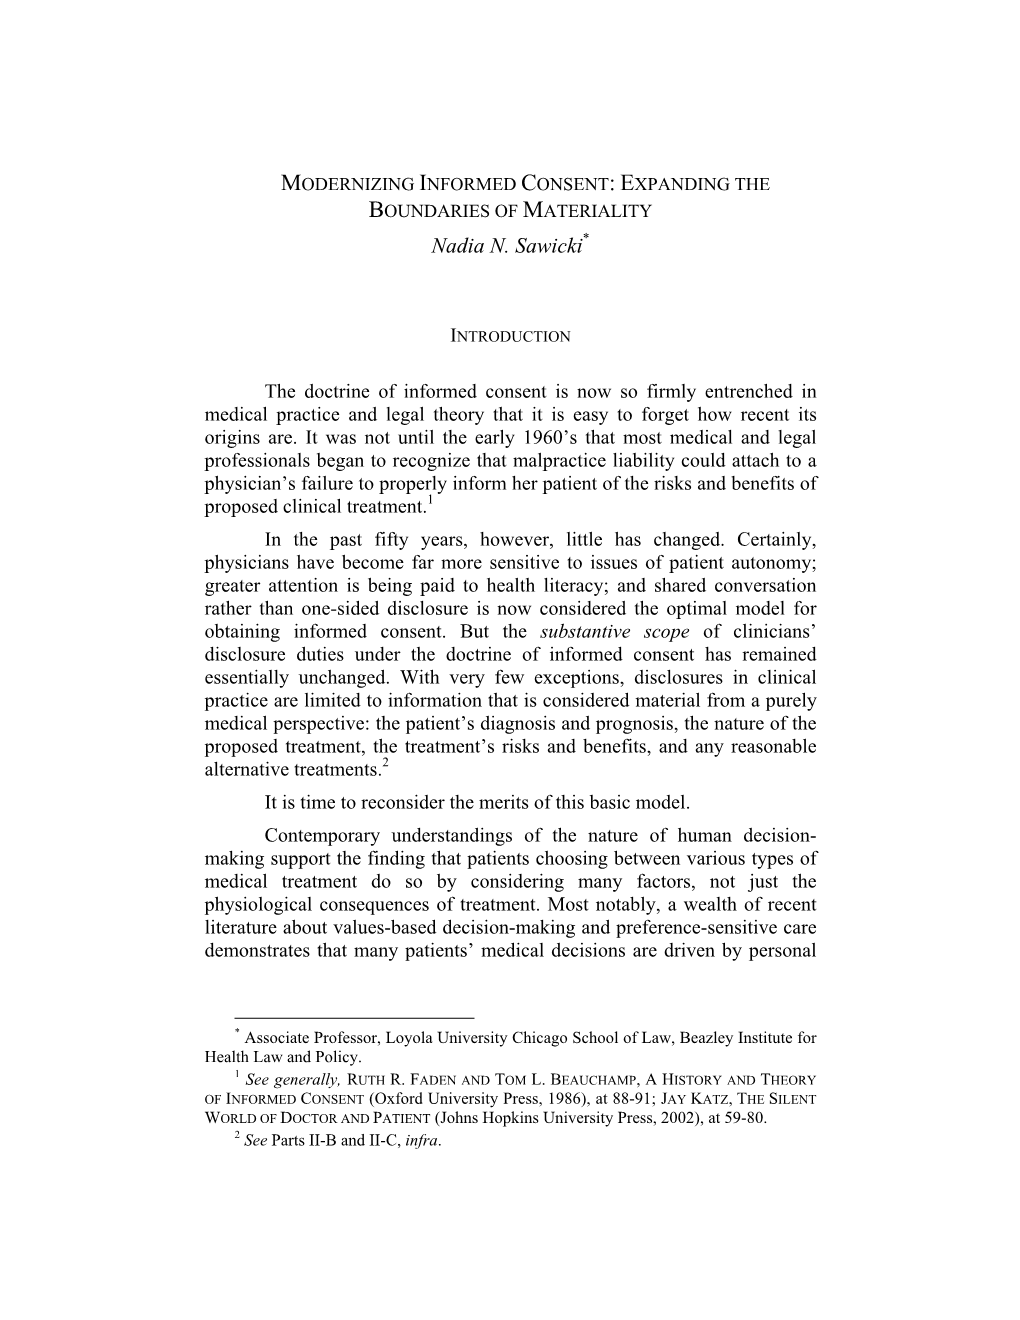 MODERNIZING INFORMED CONSENT: EXPANDING the BOUNDARIES of MATERIALITY Nadia N